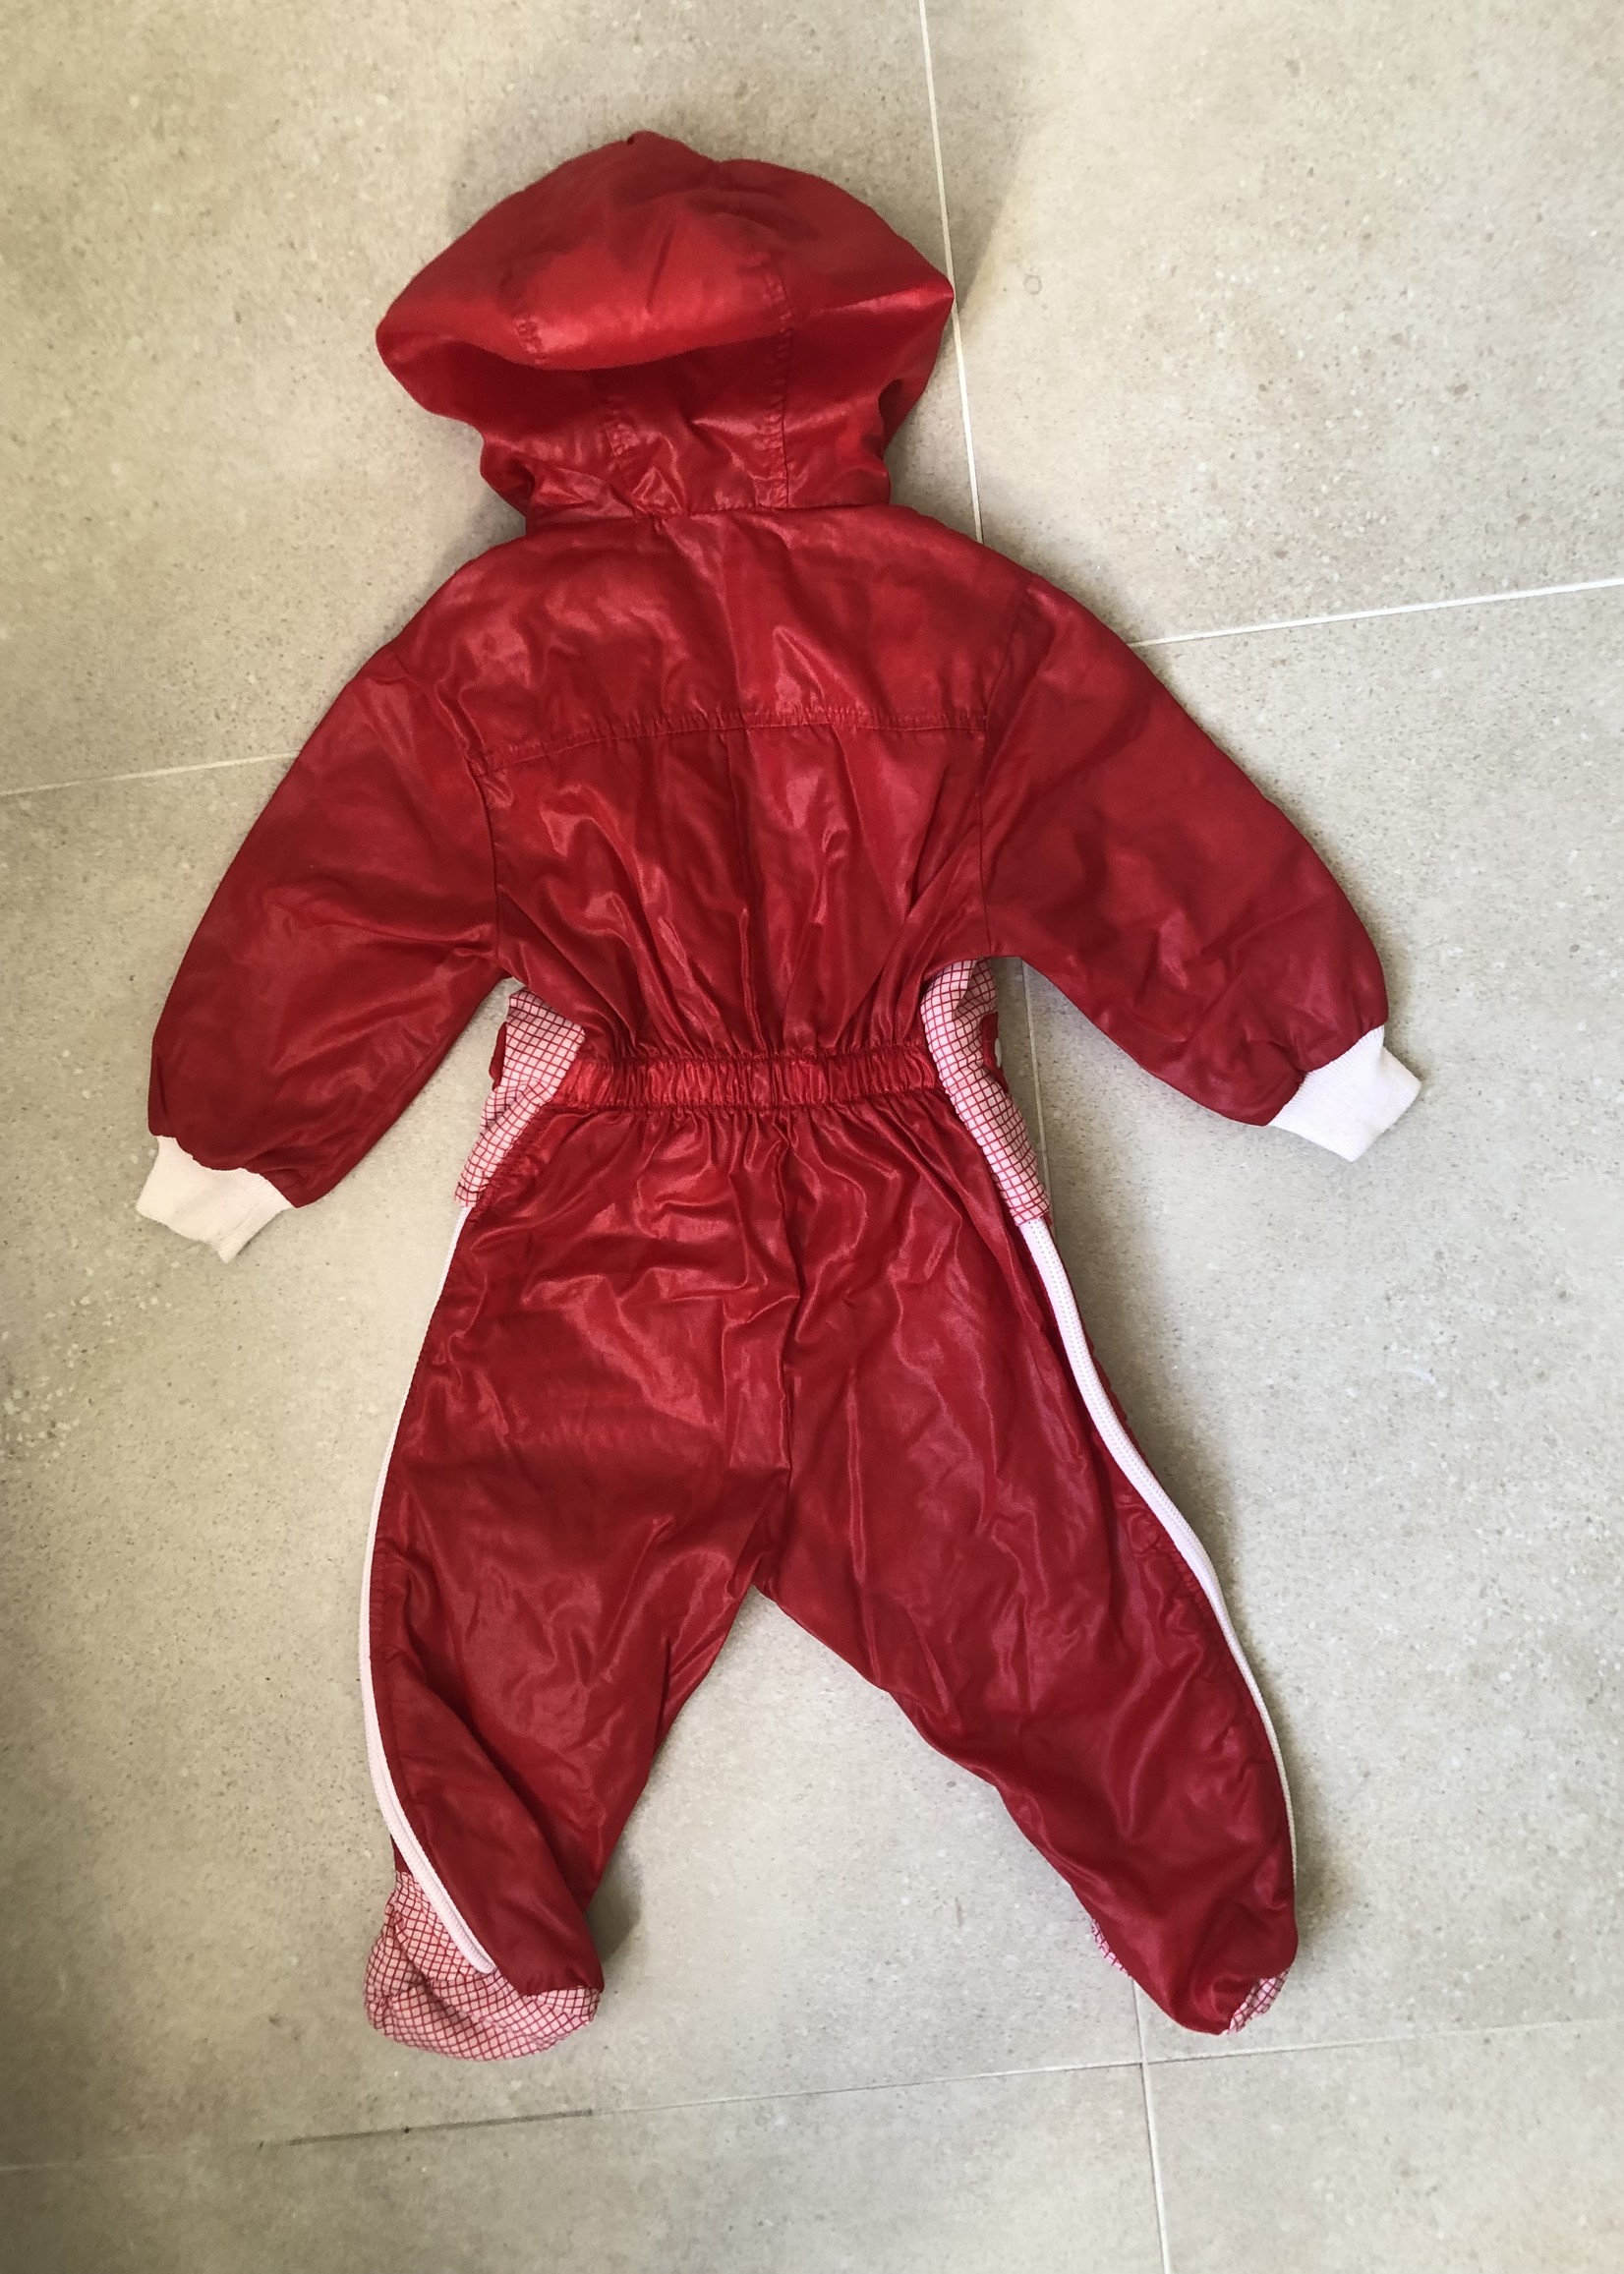 Red water-resistant suit 9m